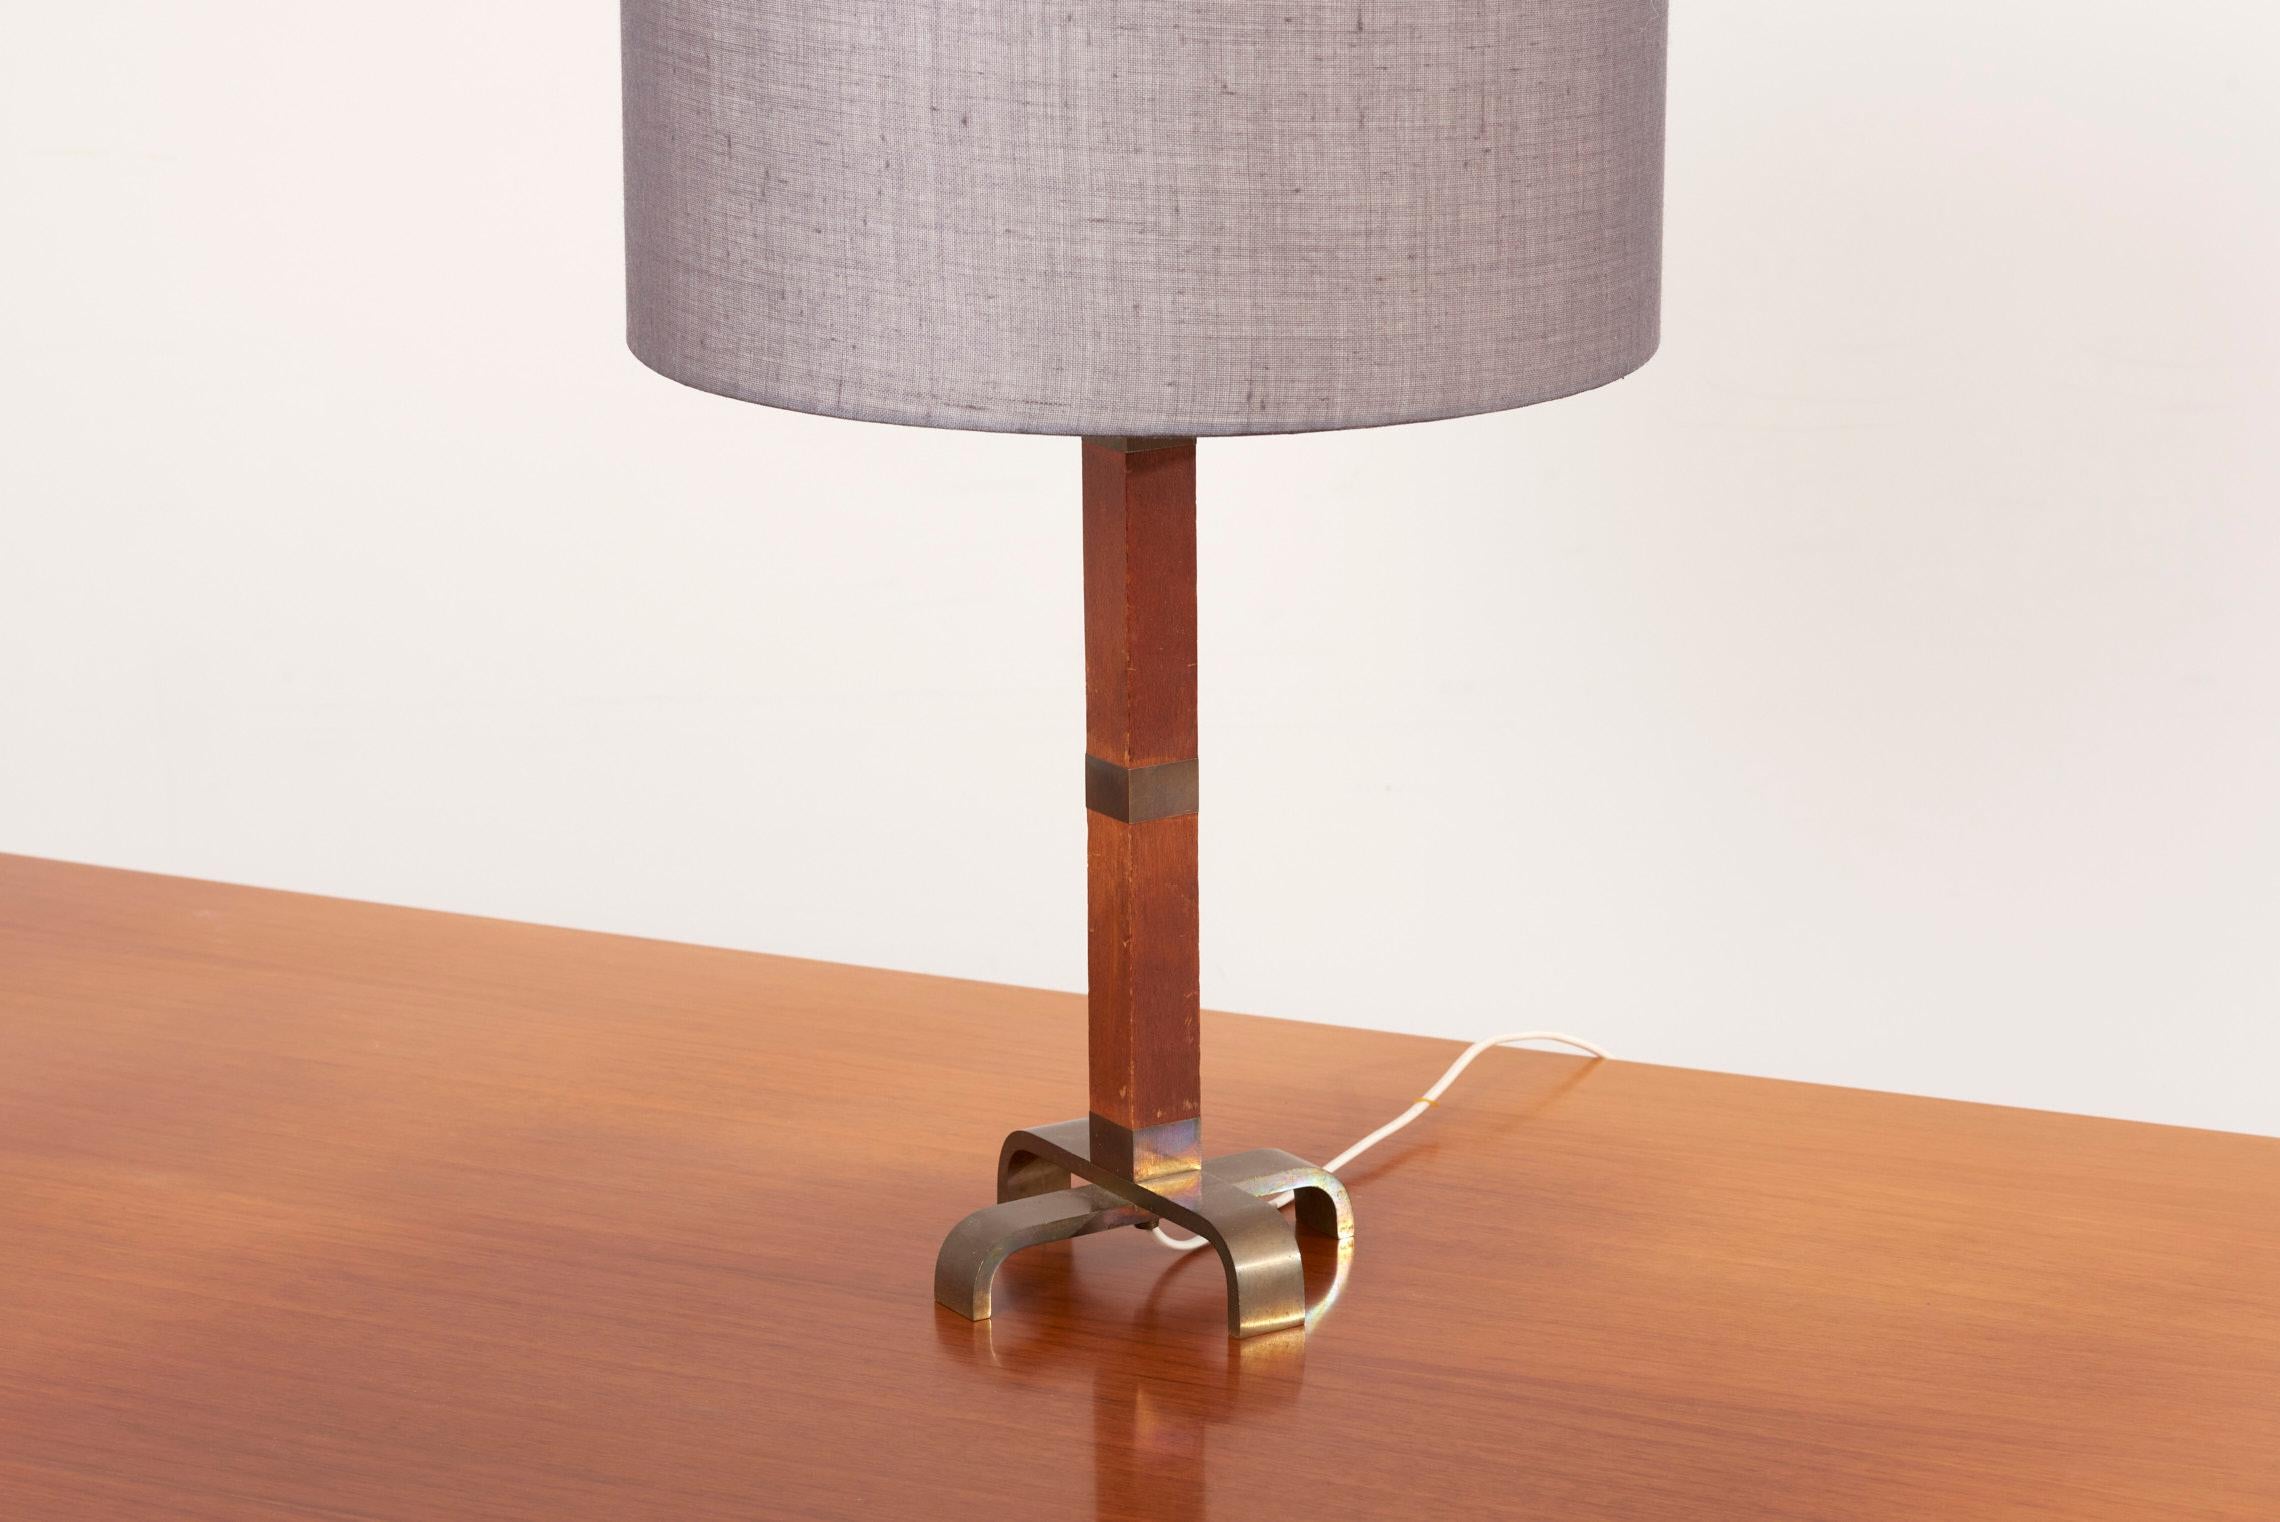 Danish Table Lamp with Wooden Base and Grey Lampshade, 1950s For Sale